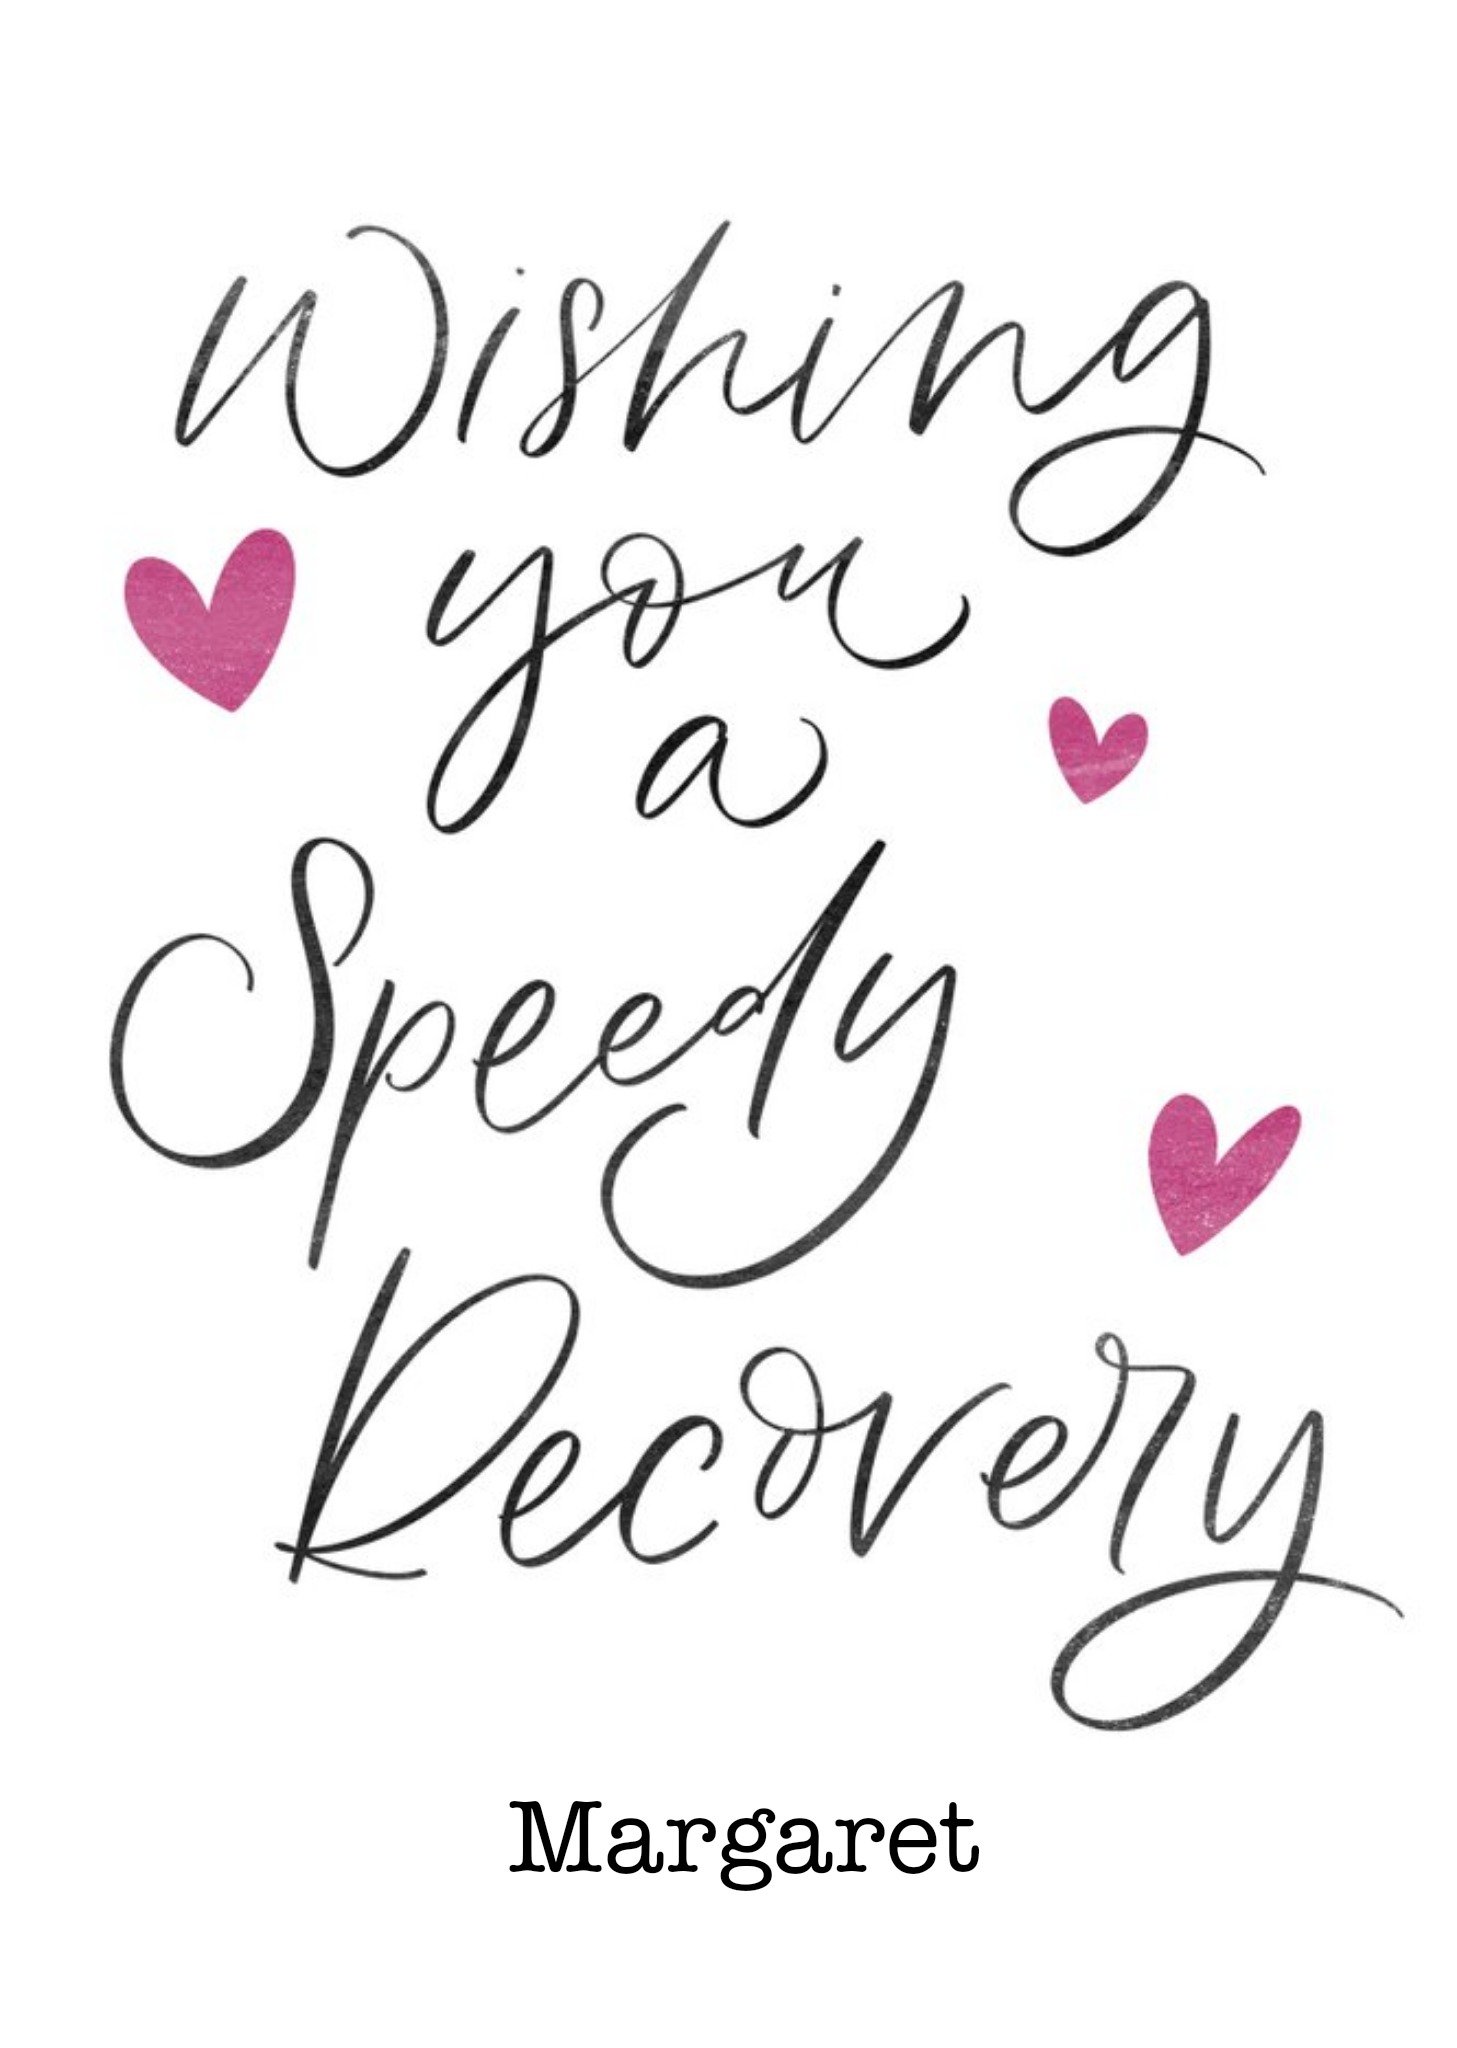 Moonpig Wishing You A Speedy Recovery Get Well Card, Large